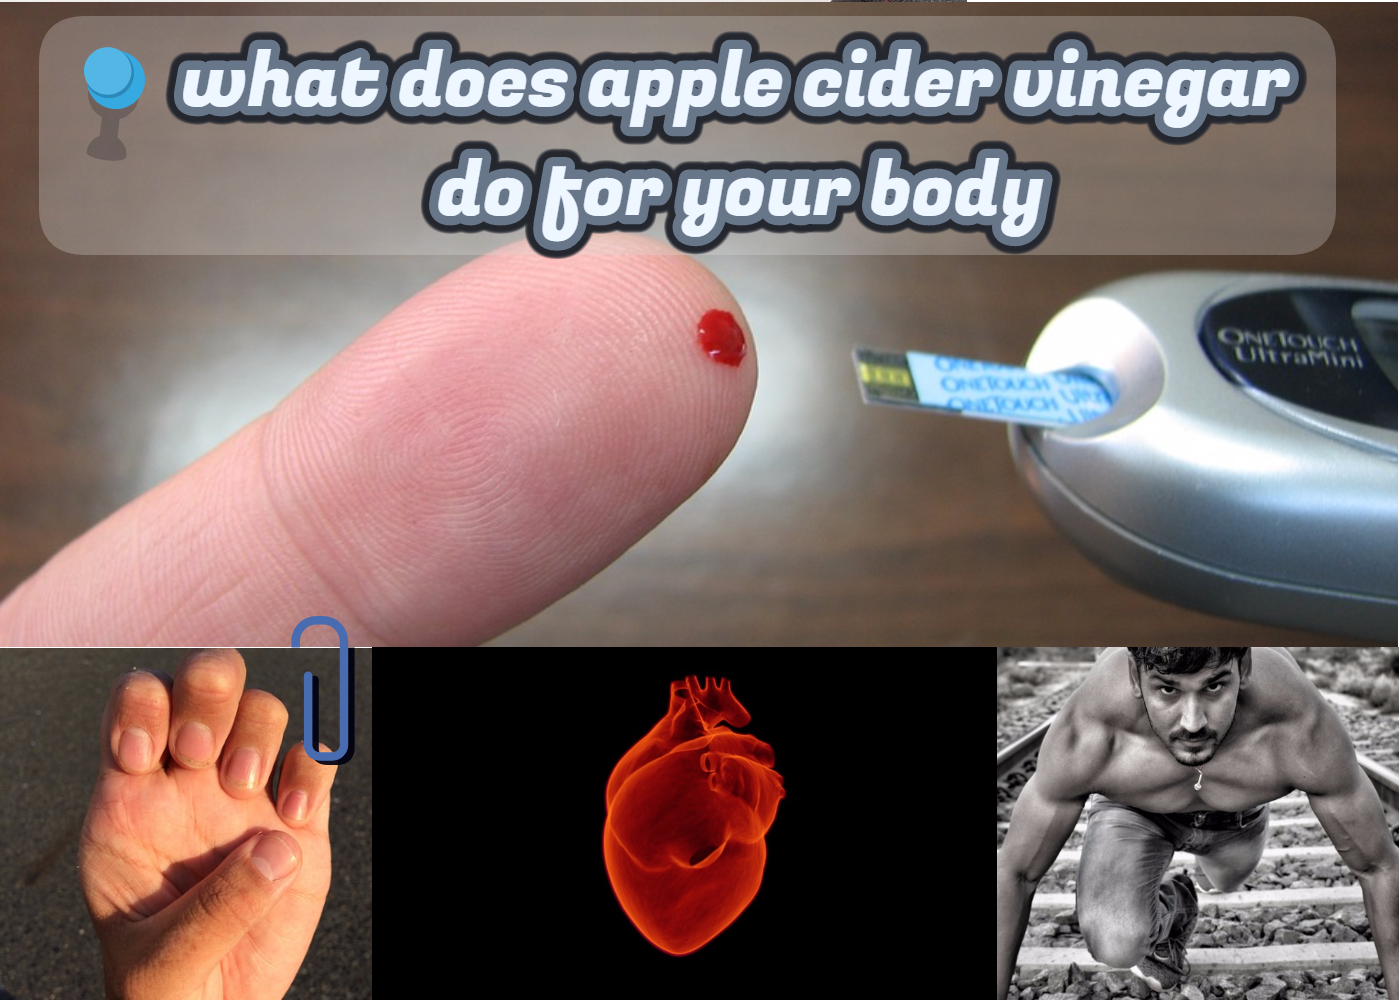 about What does apple cider vinegar do for your body